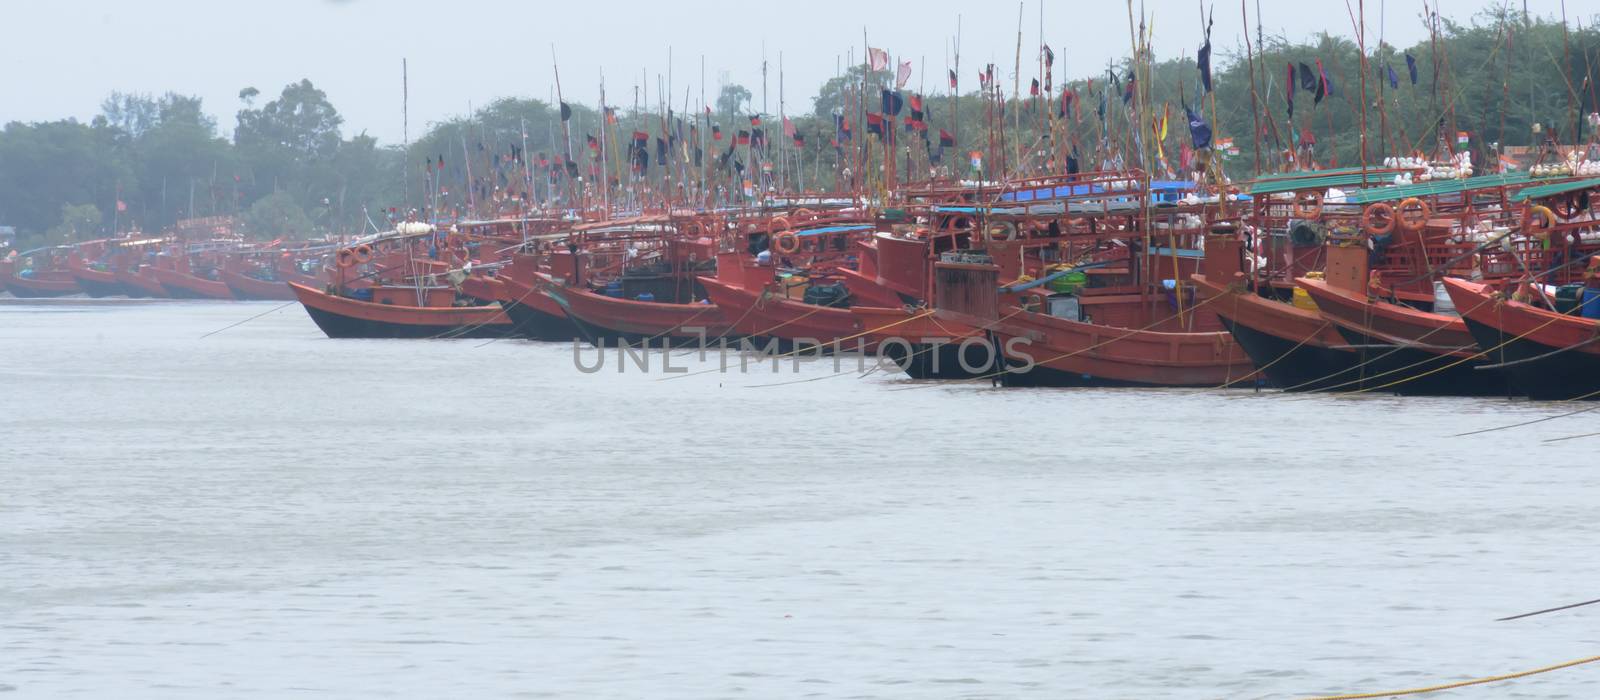 Many Commercial nautical sea vessels like trawler boat ship sailboat, all Red and Black Color code to strength coastal security anchored in protected nautical mile zone area. Midnapore, India May 2019